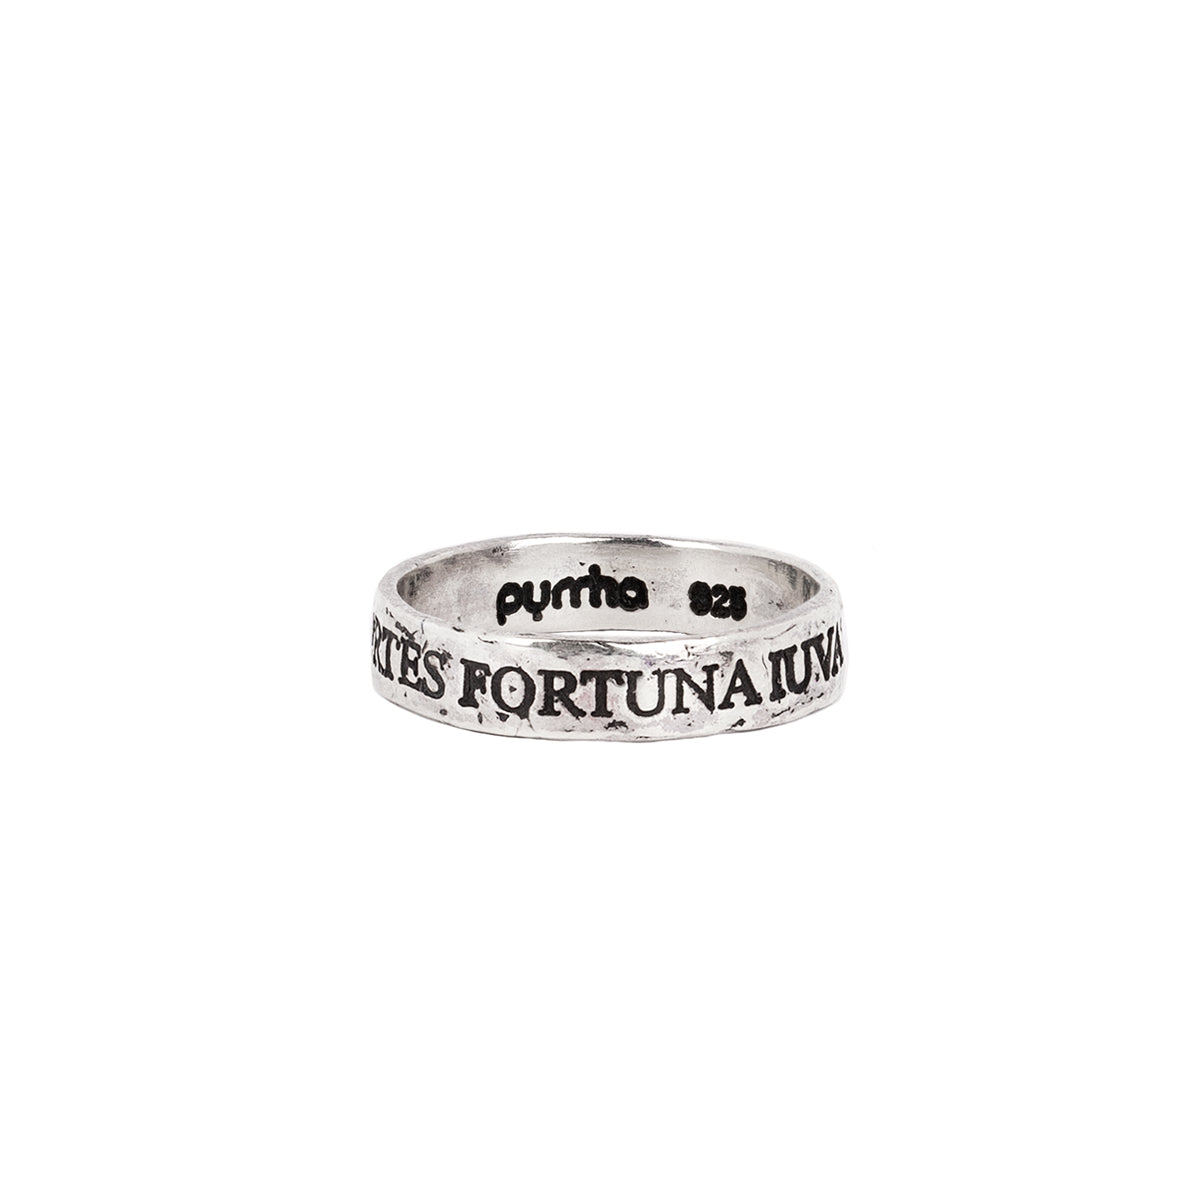 A silver band ring with the phrase Fortes Fortuna Luvat engraved into it